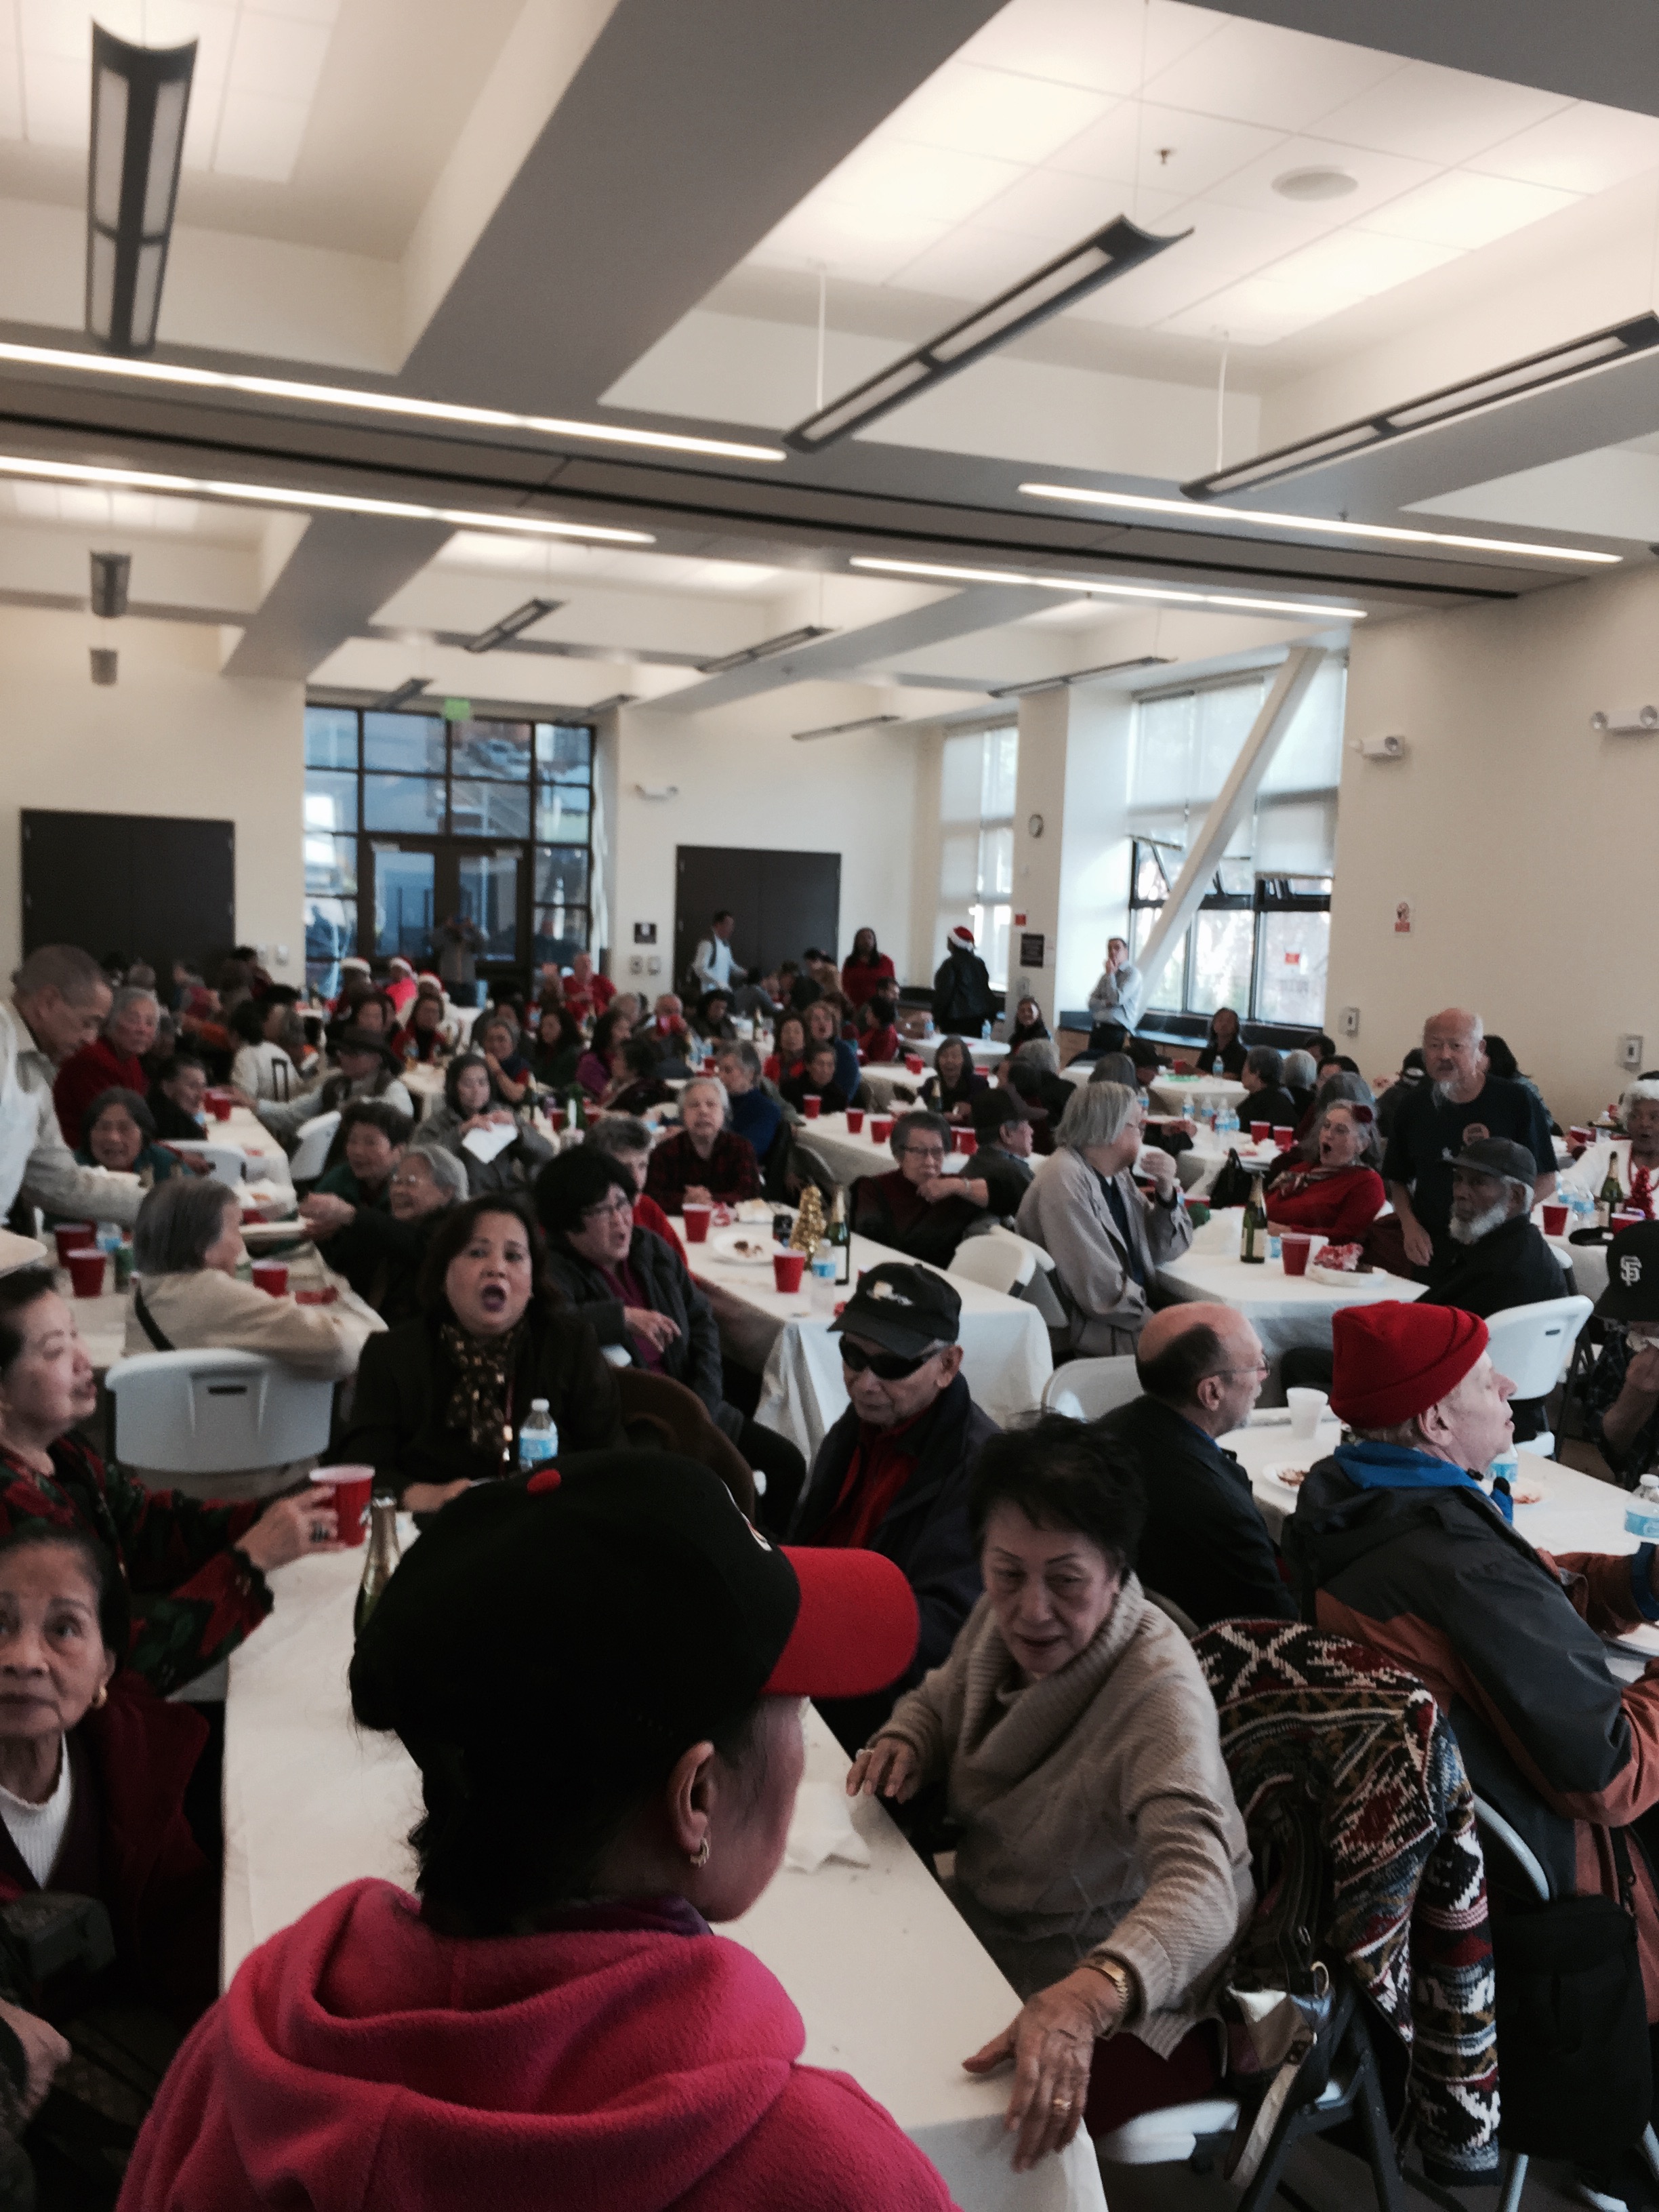 Seniors gathered for Cable Car lunch are served in a festive banquet room